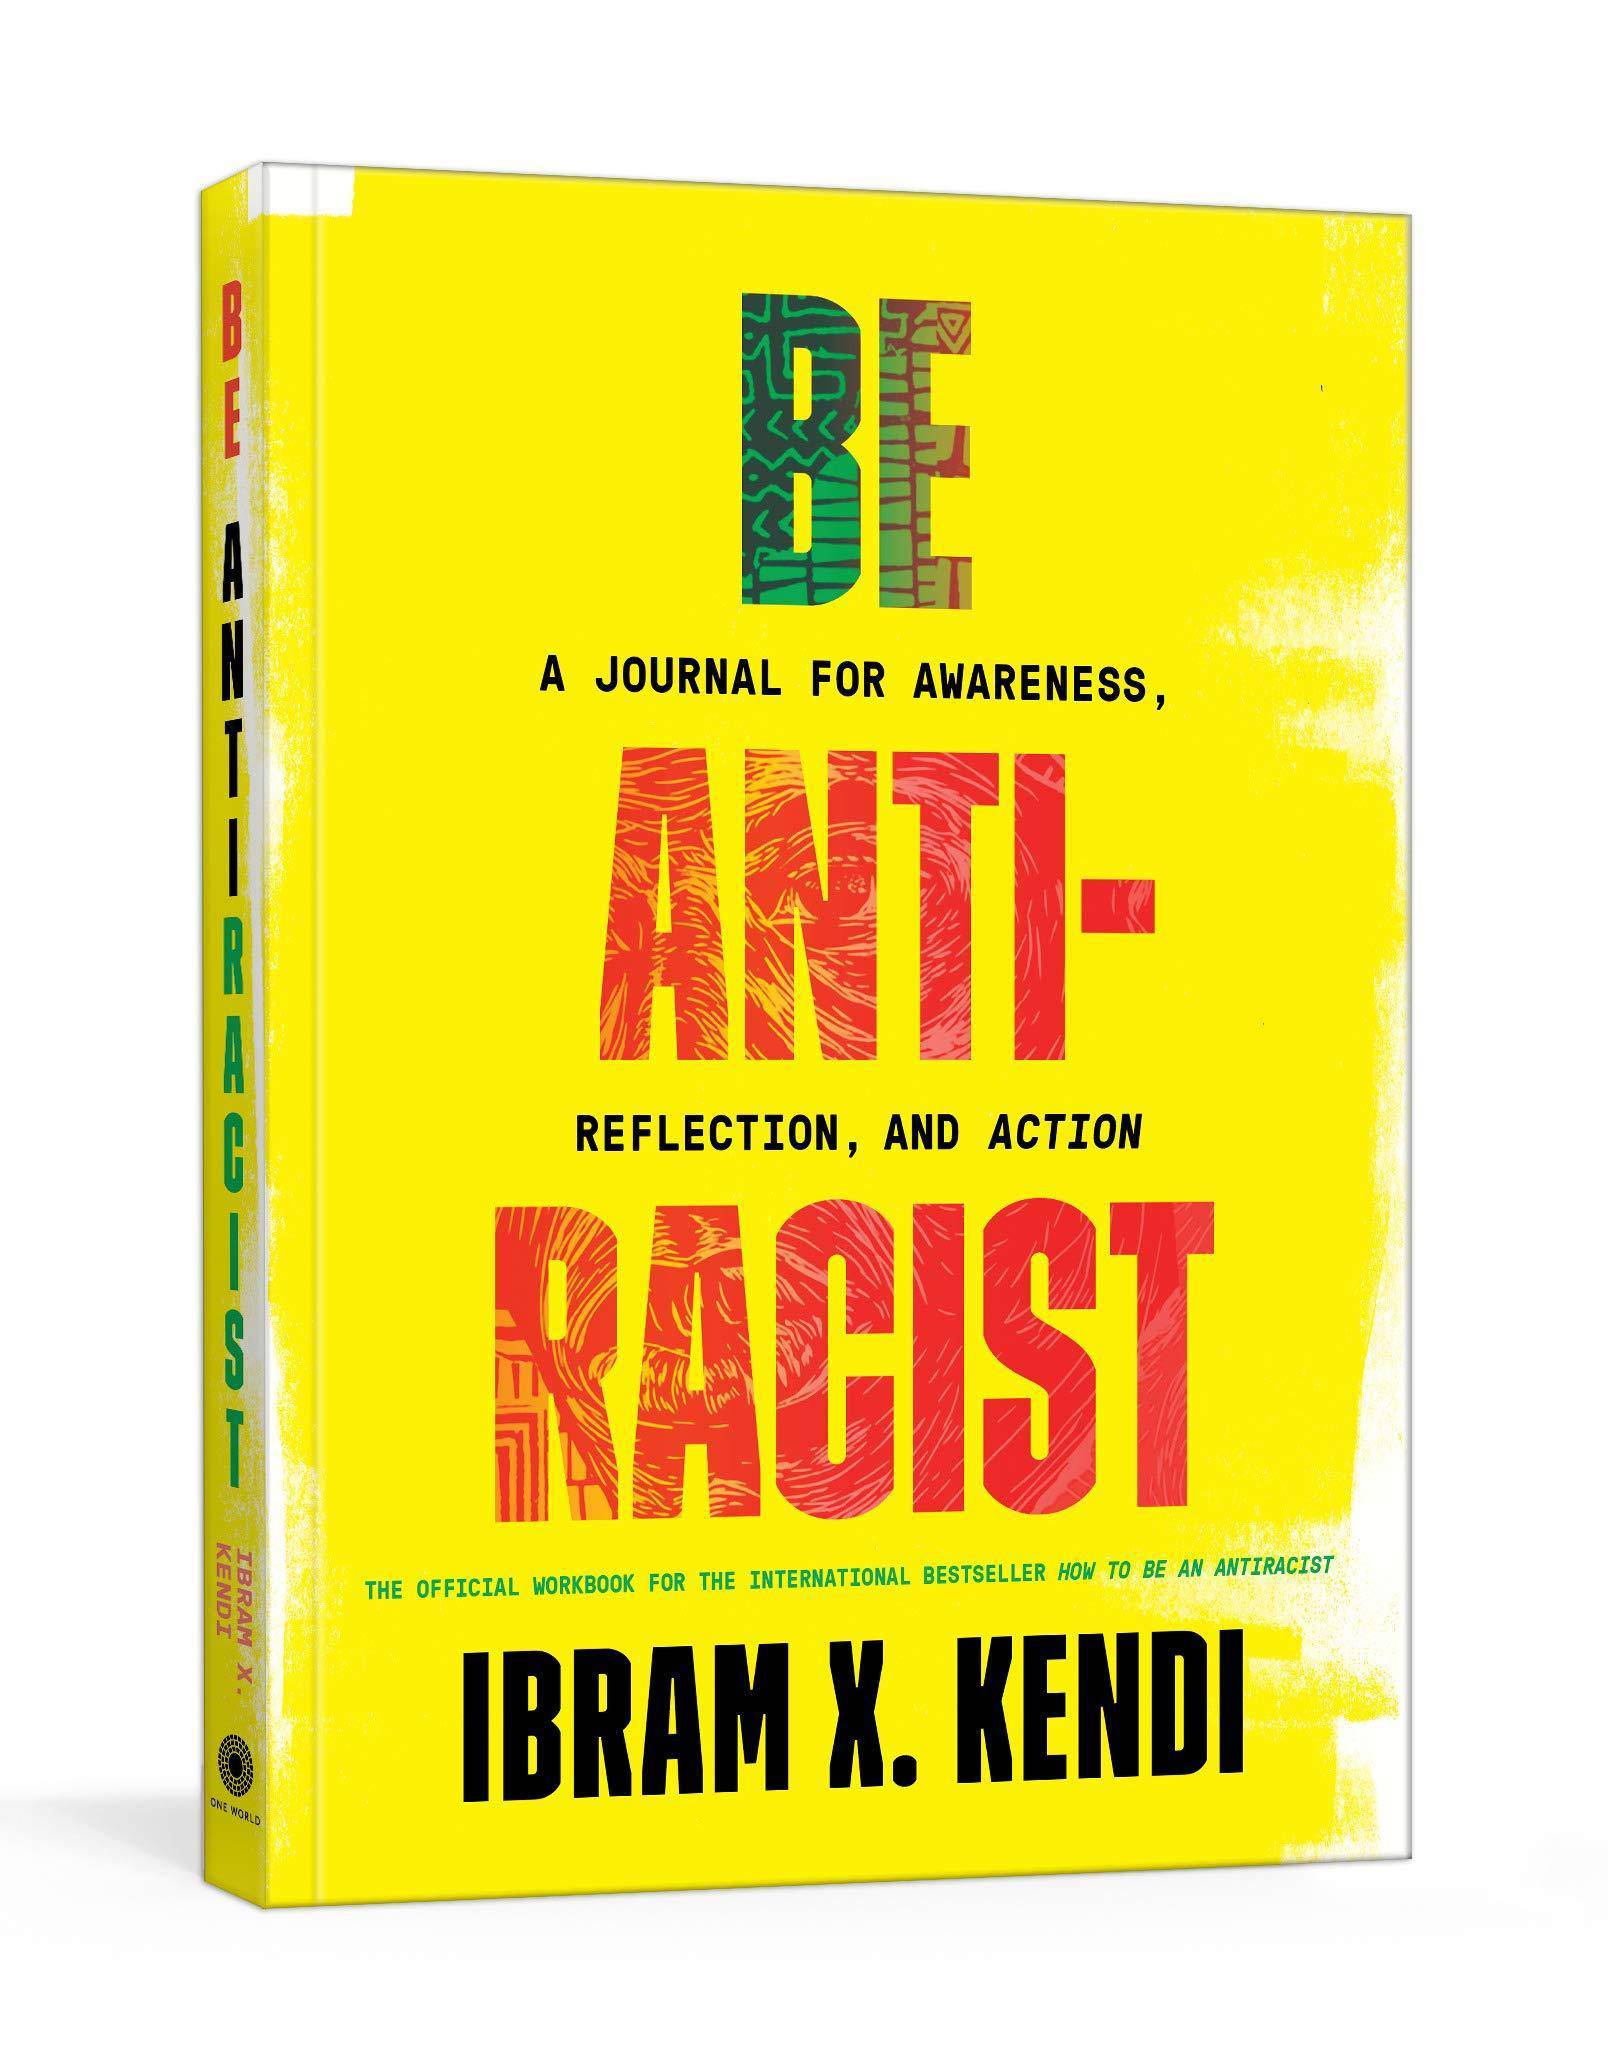 Be Antiracist: A Journal for Awareness, Reflection, and Action - SureShot Books Publishing LLC